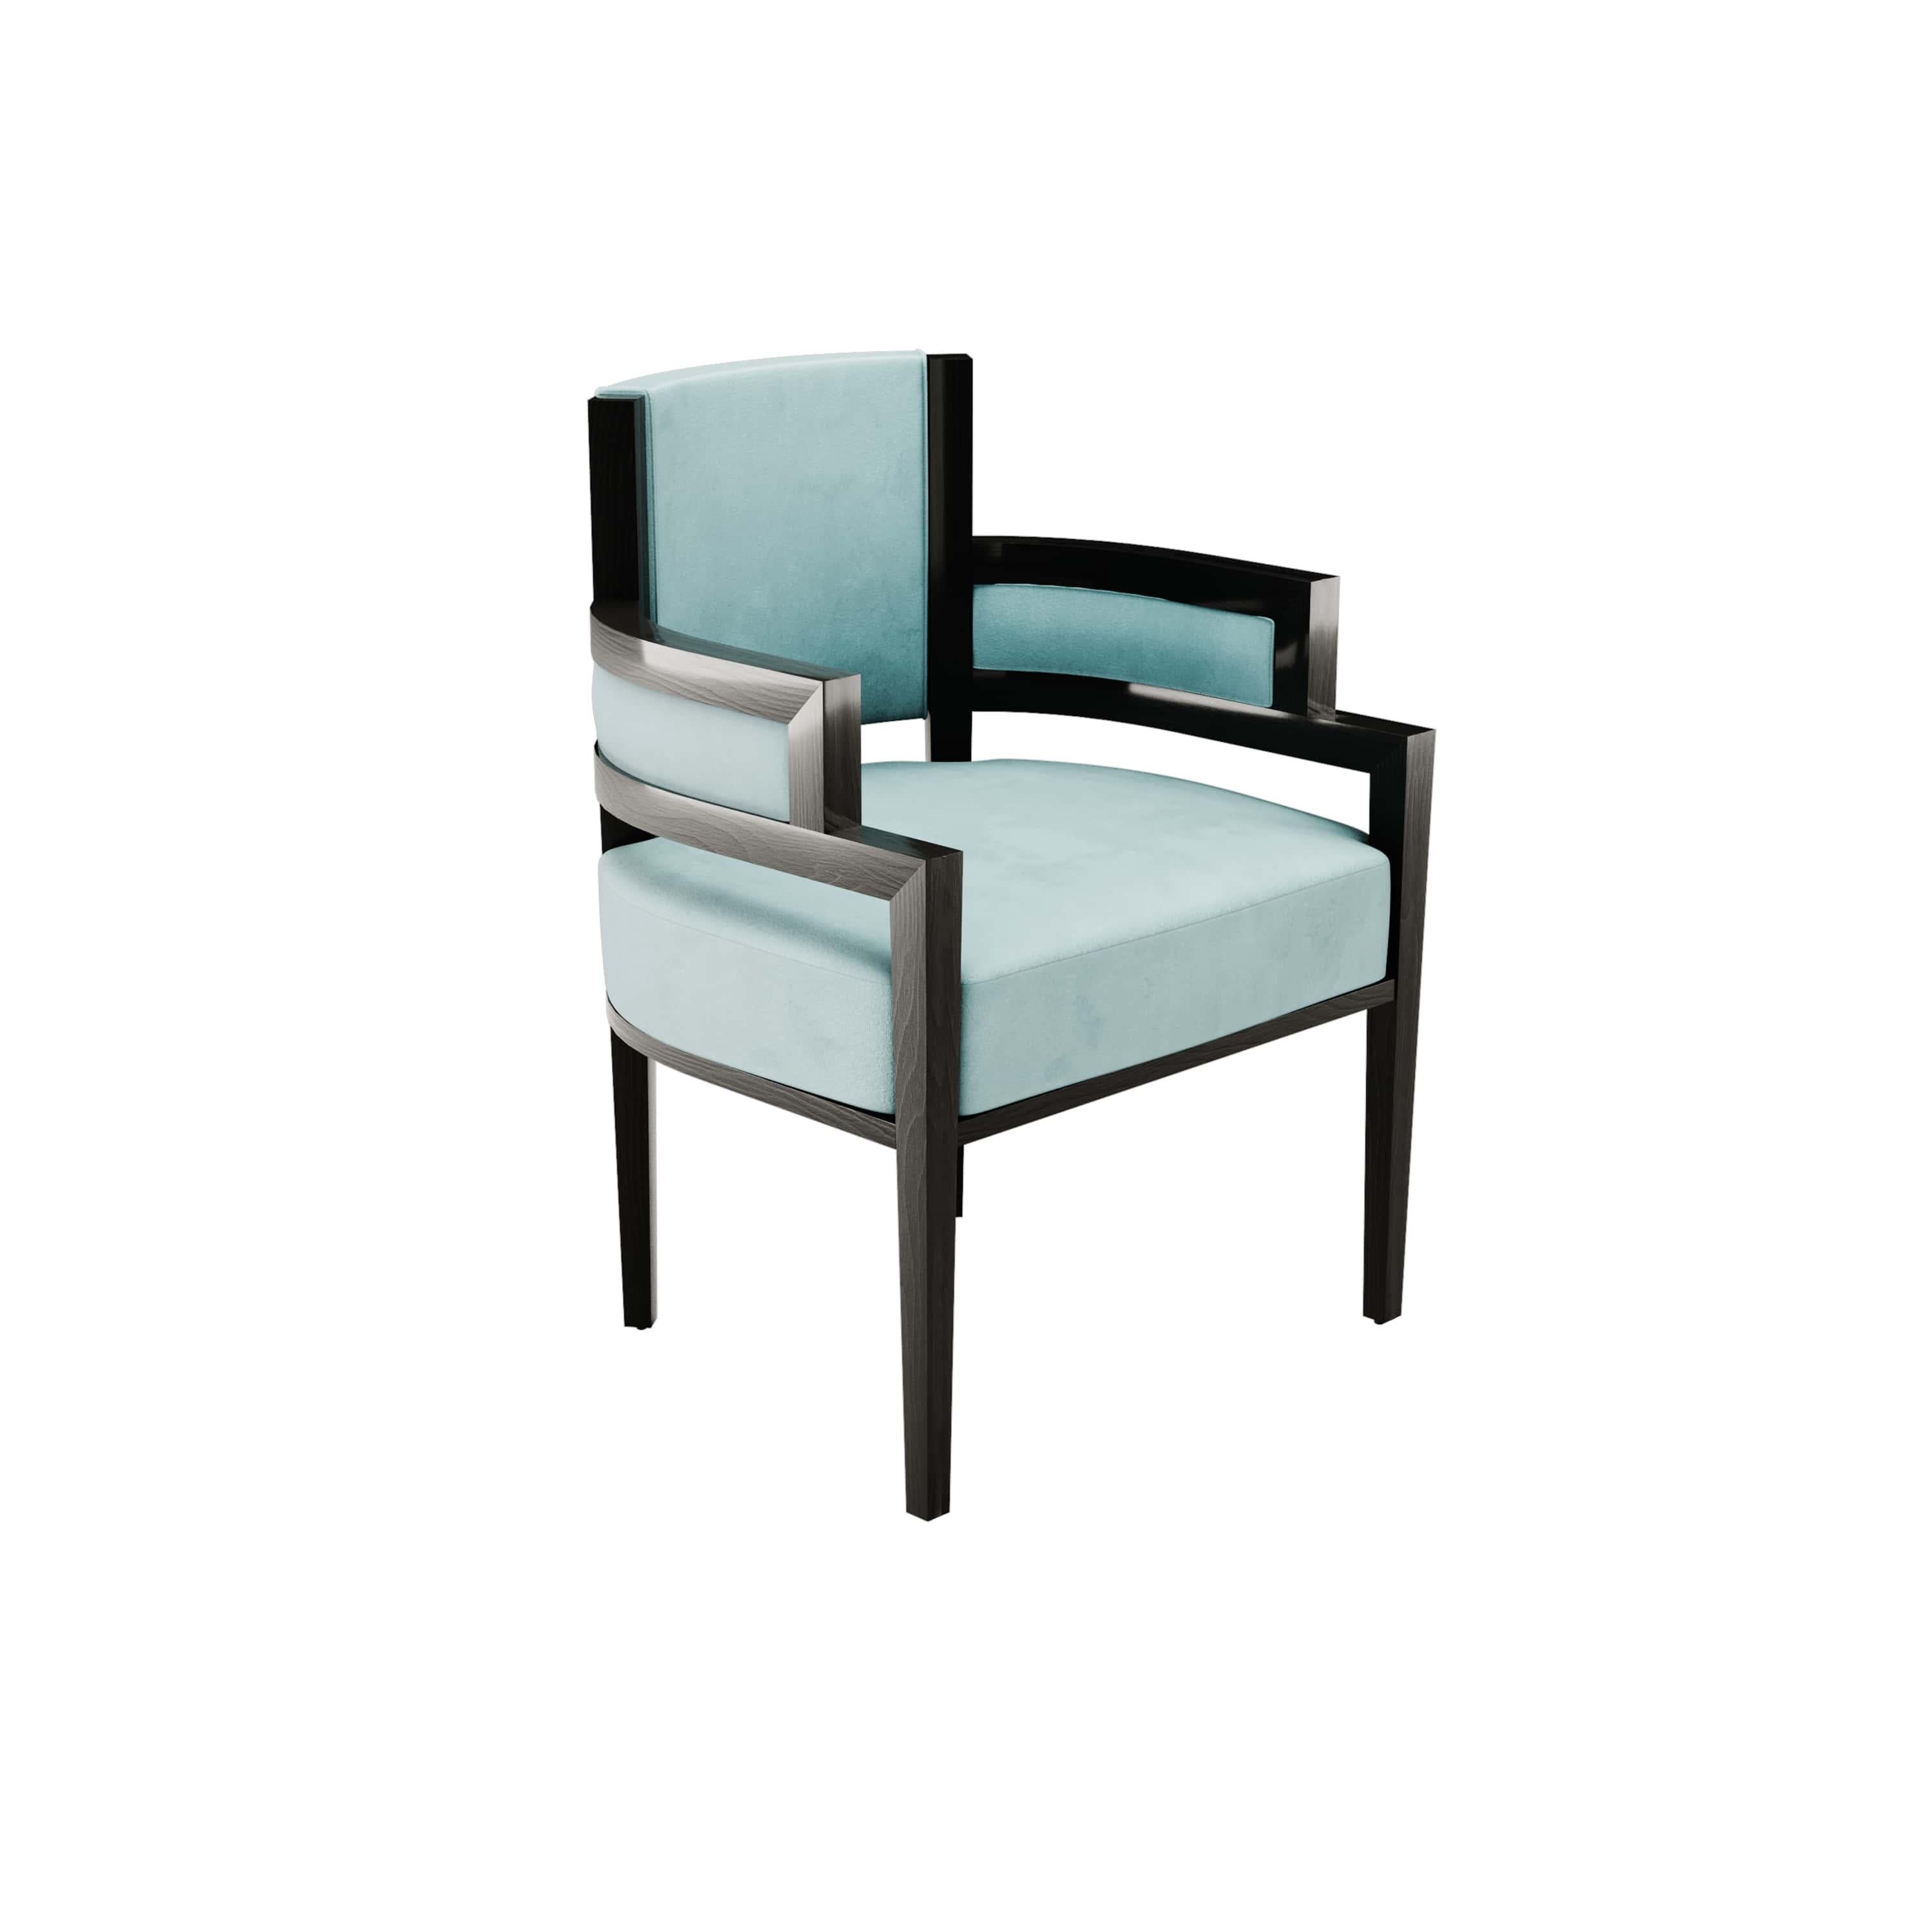 Pina Chair is an art deco-style dining chair whose shape provides the best comfort for guests—upholstered in velvet with a modern wood structure. Perfect for modern dining room projects that aim for a classic-chic vibe.

Materials: Upholstered in